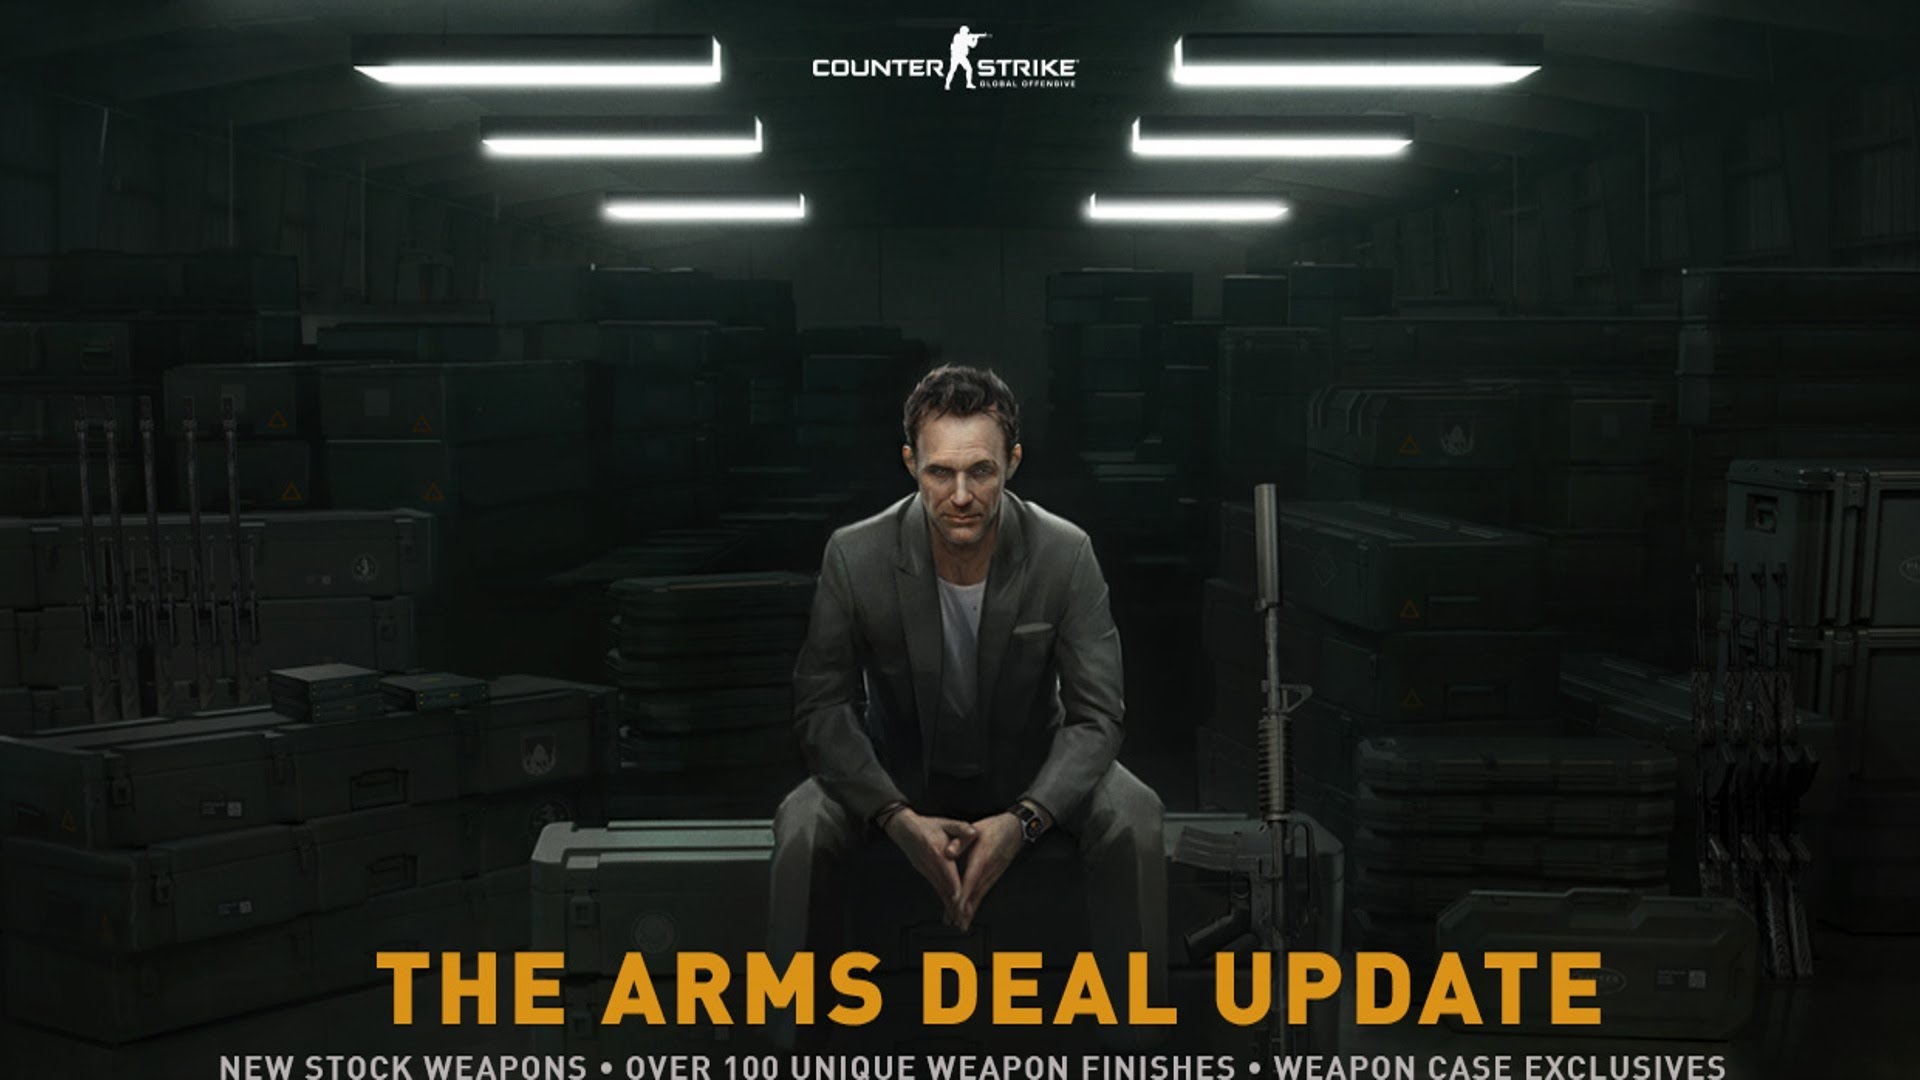 Arms deal. Arms deal CS go. CS go Arms deal update. Arms deal КС.